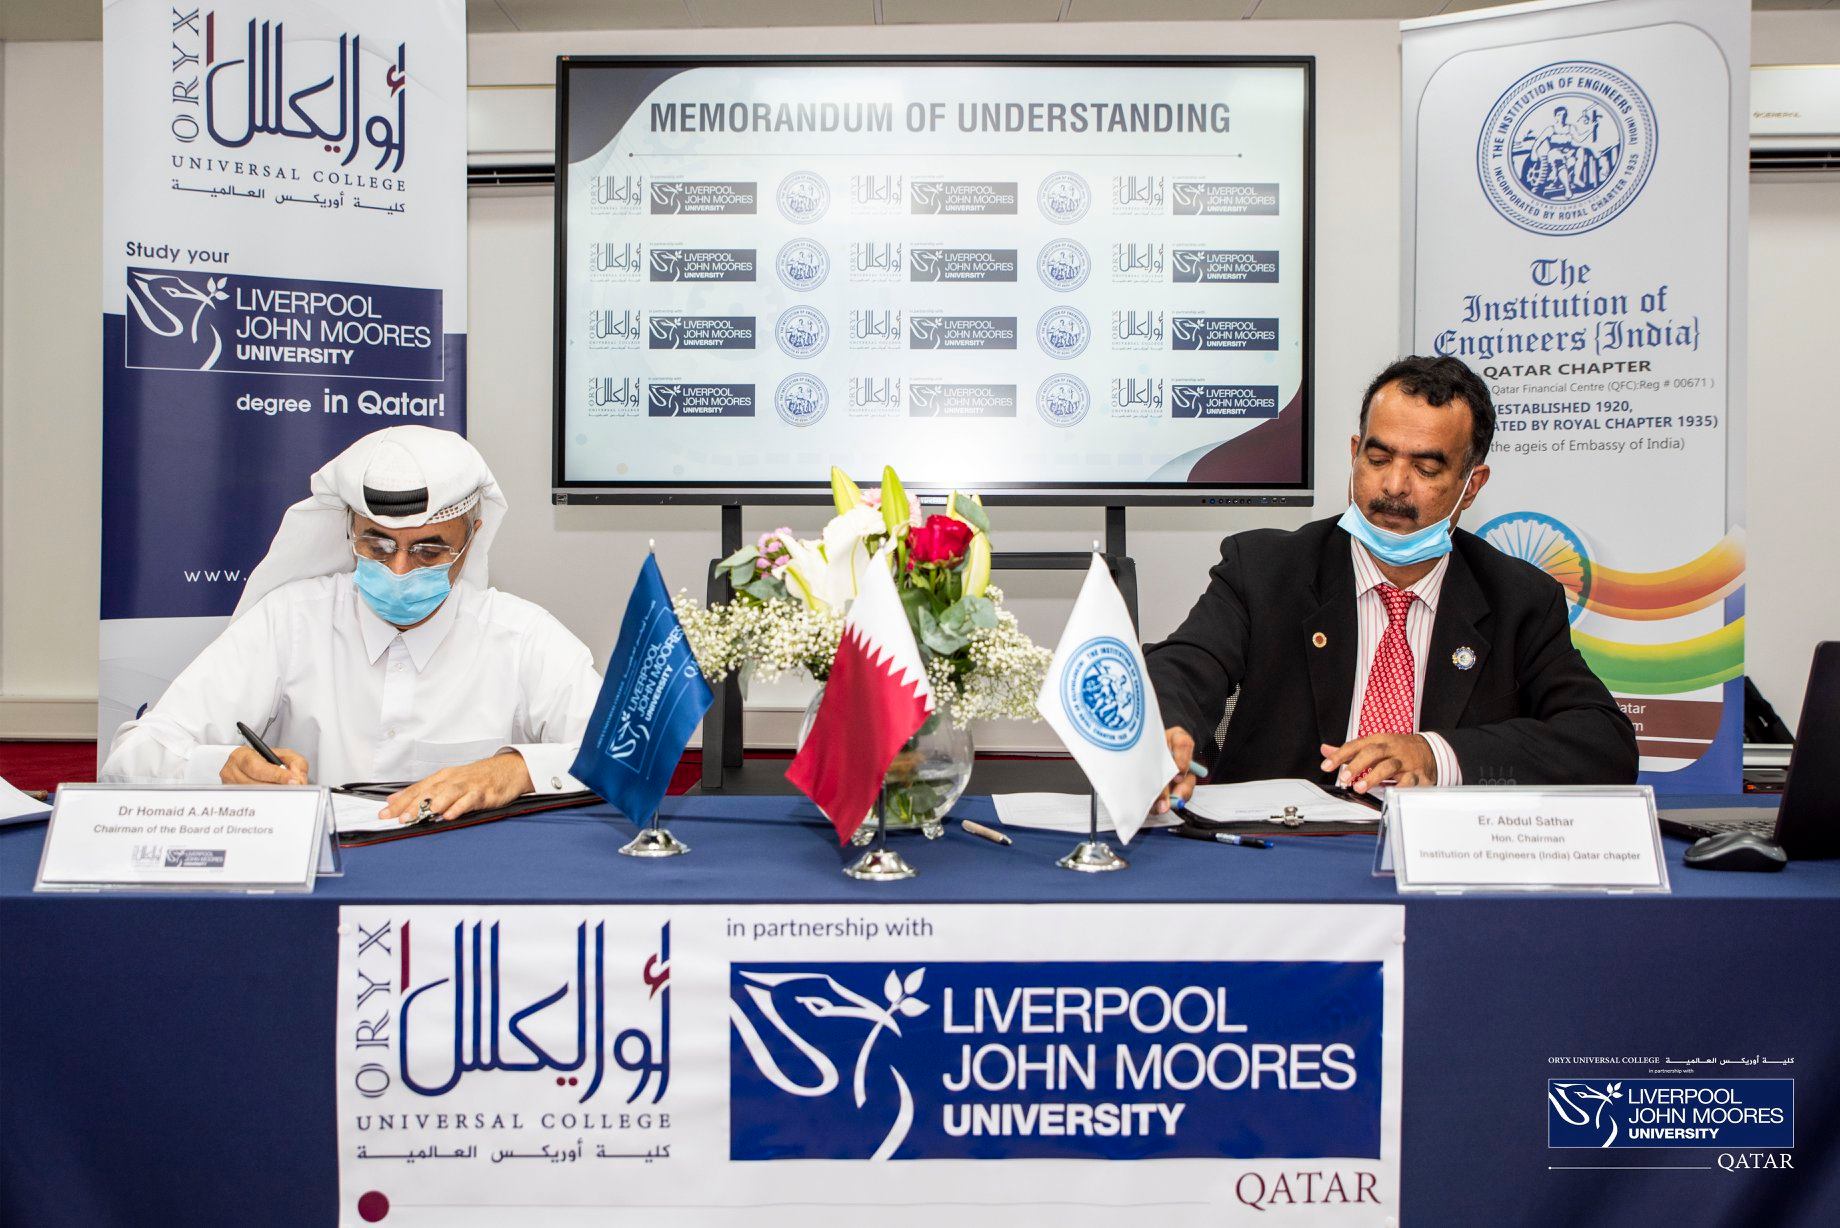 MOU signed between Oryx Universal College, in partnership with Liverpool John Moores University, and The Institution of Engineers - India (IEI) (Qatar Chapter)